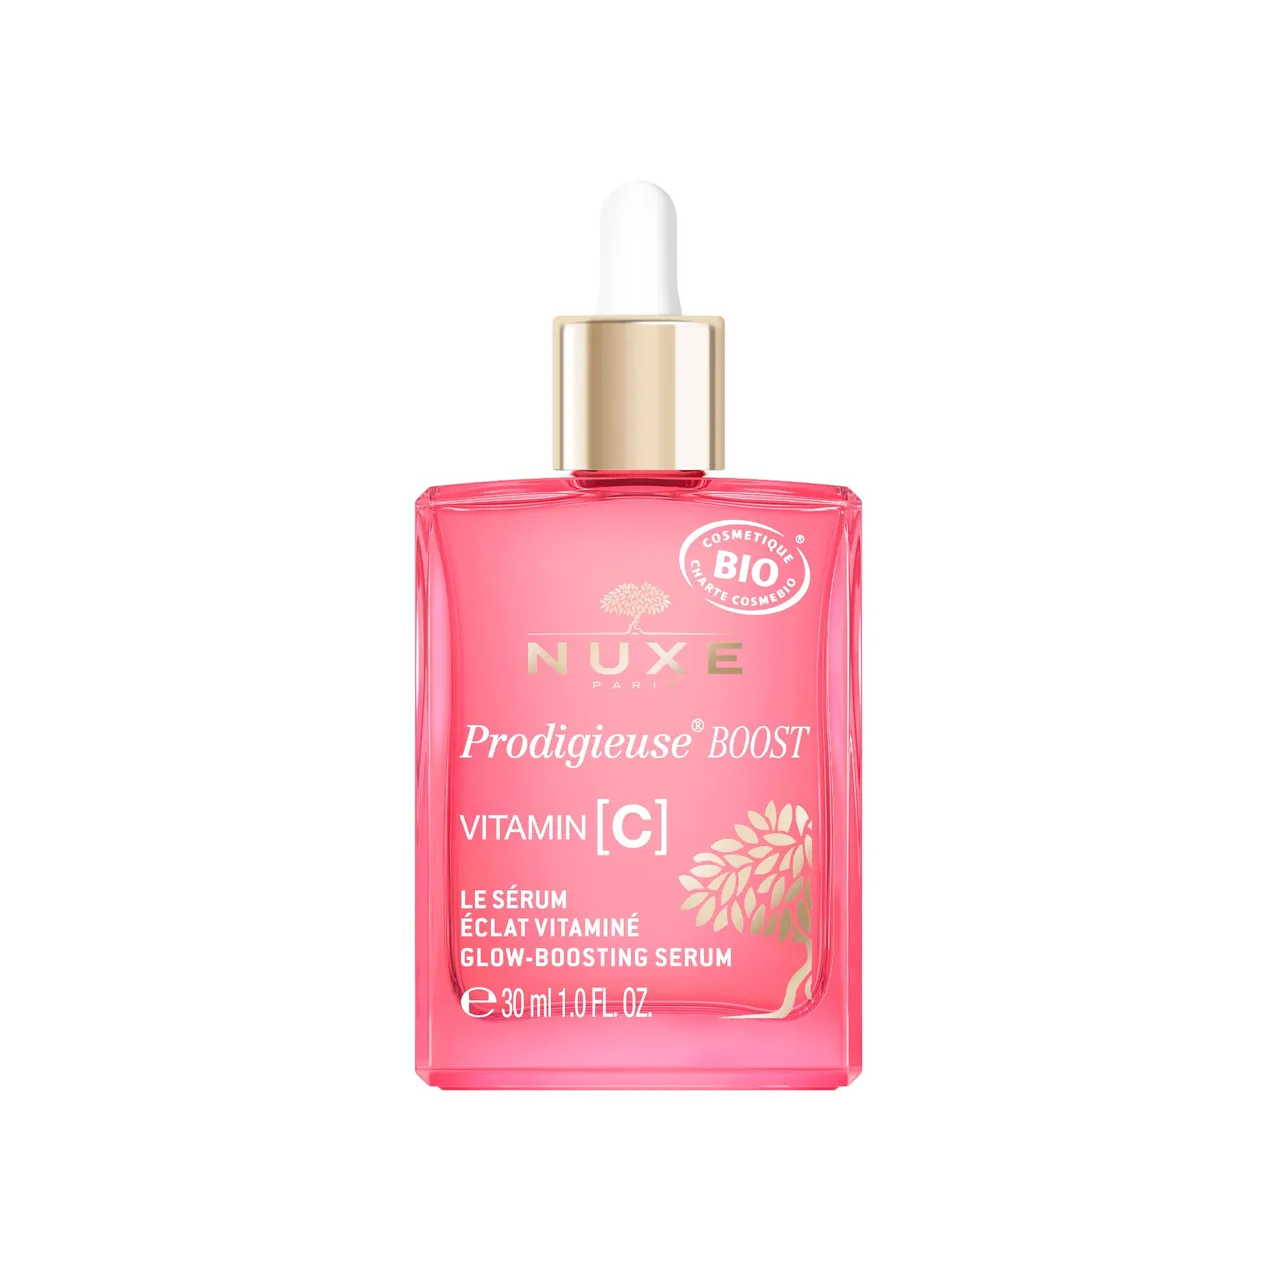 Nuxe - Prodigeuse Boost Serum